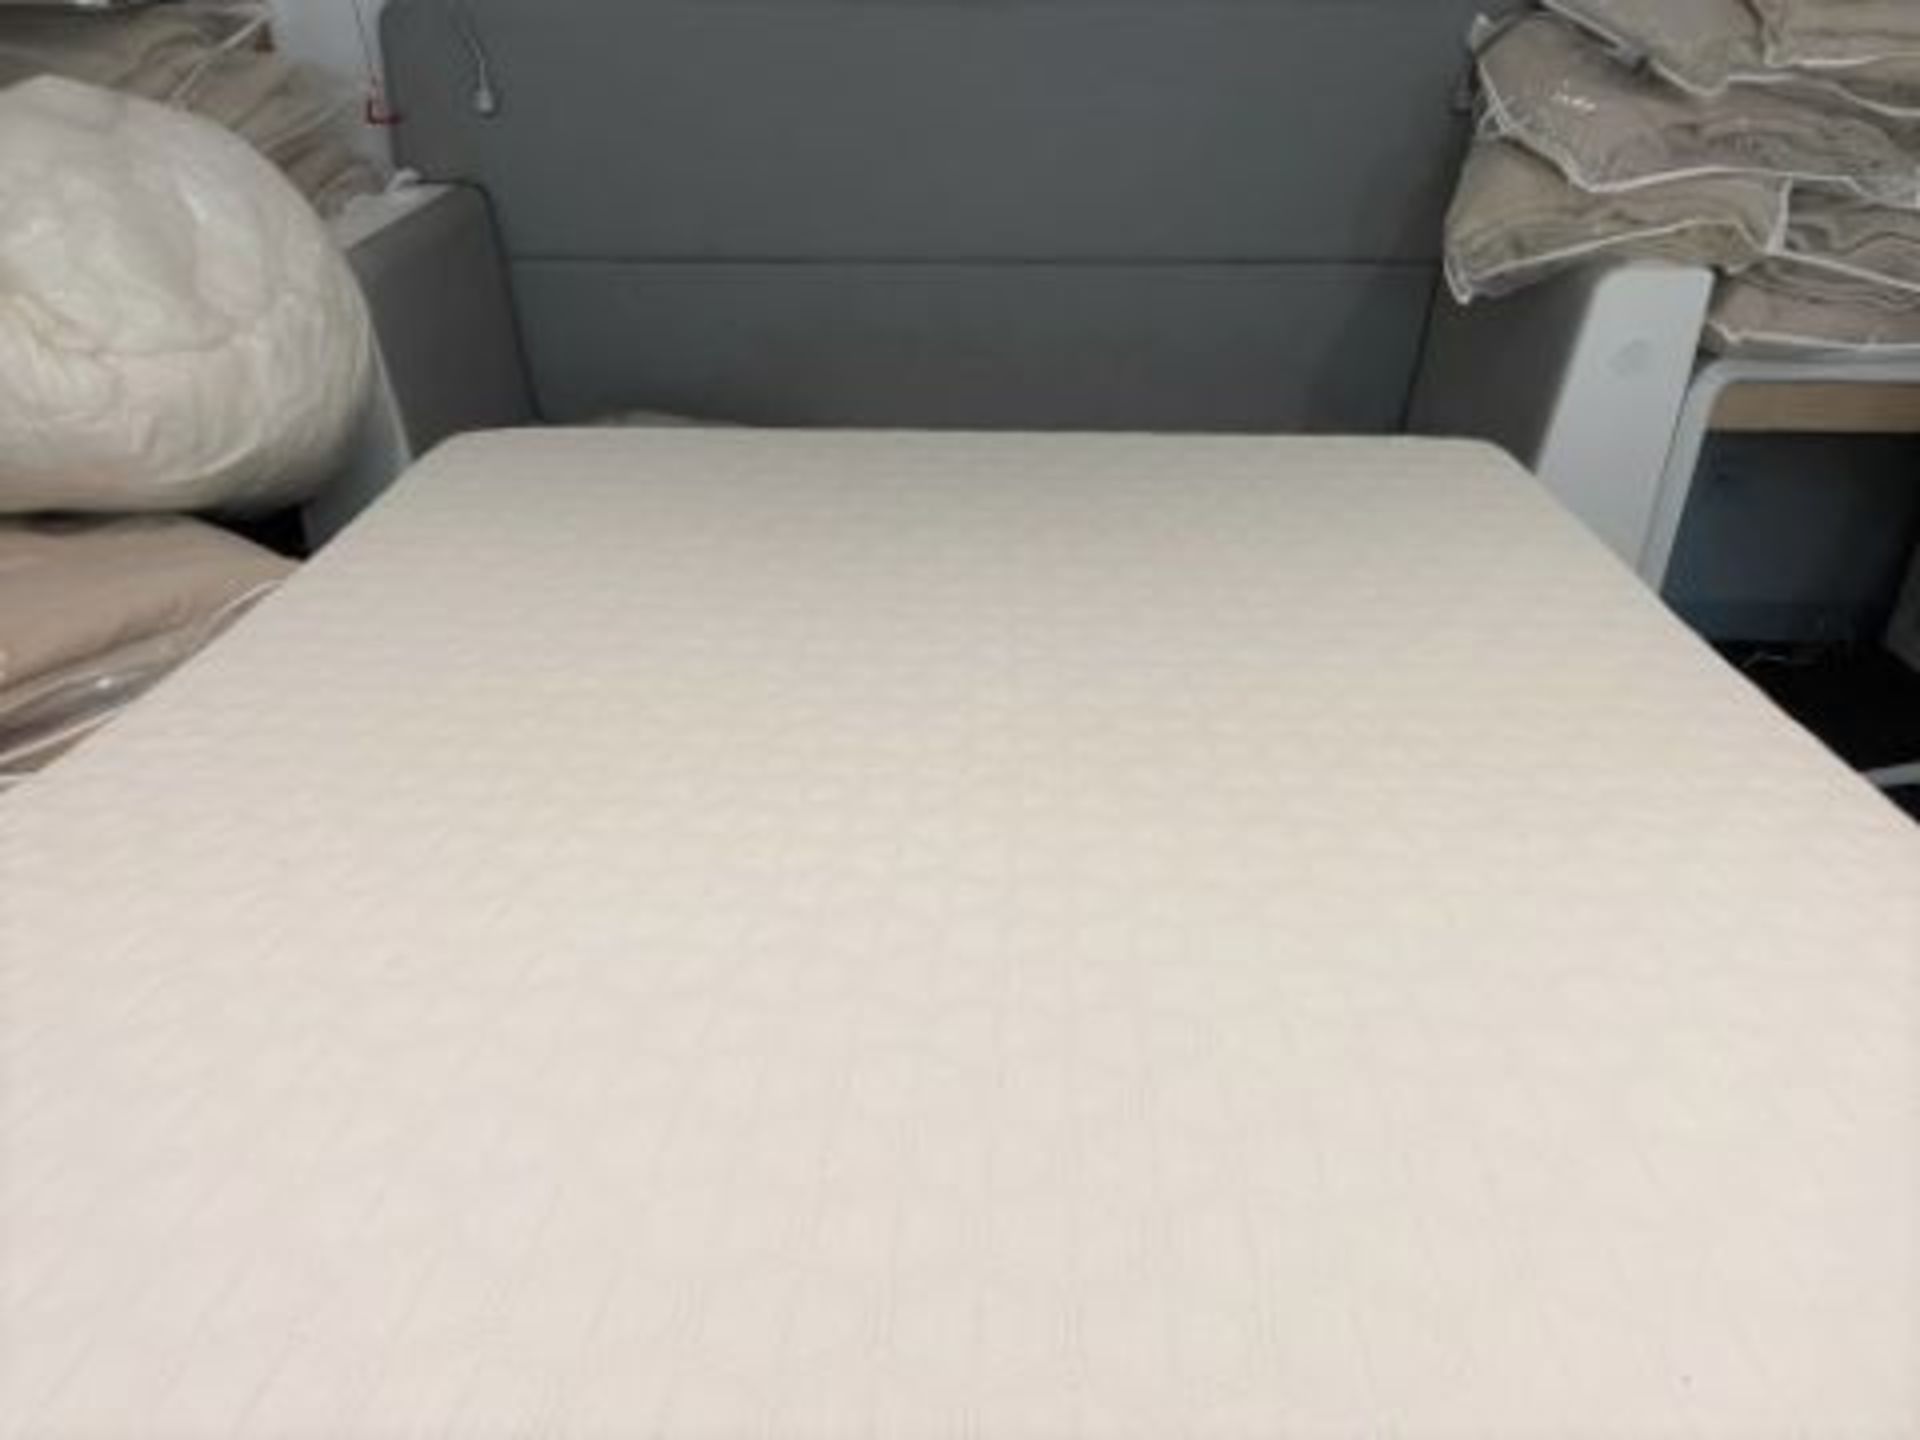 1 x Double Adjustable Space Saving Smart Bed With Serta Motion Memory Foam Mattress - Signature - Image 6 of 12